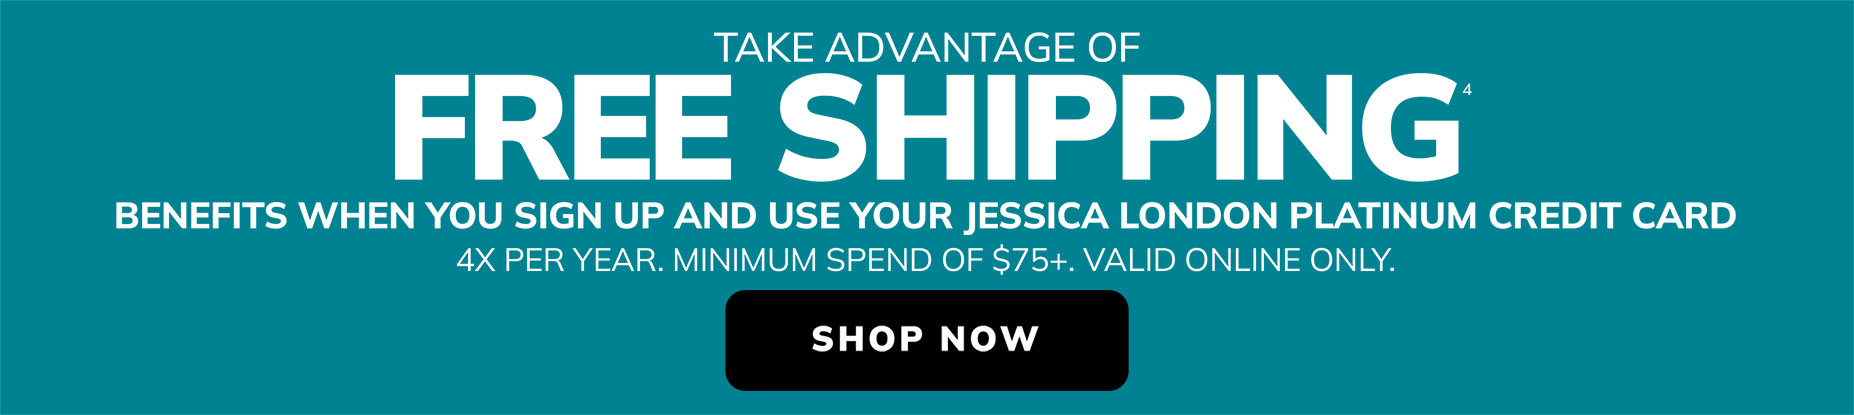 Take advantage of free shipping benefits when you use your jessica london platinum credit card 4x per year minimum spend of $75 shop now 